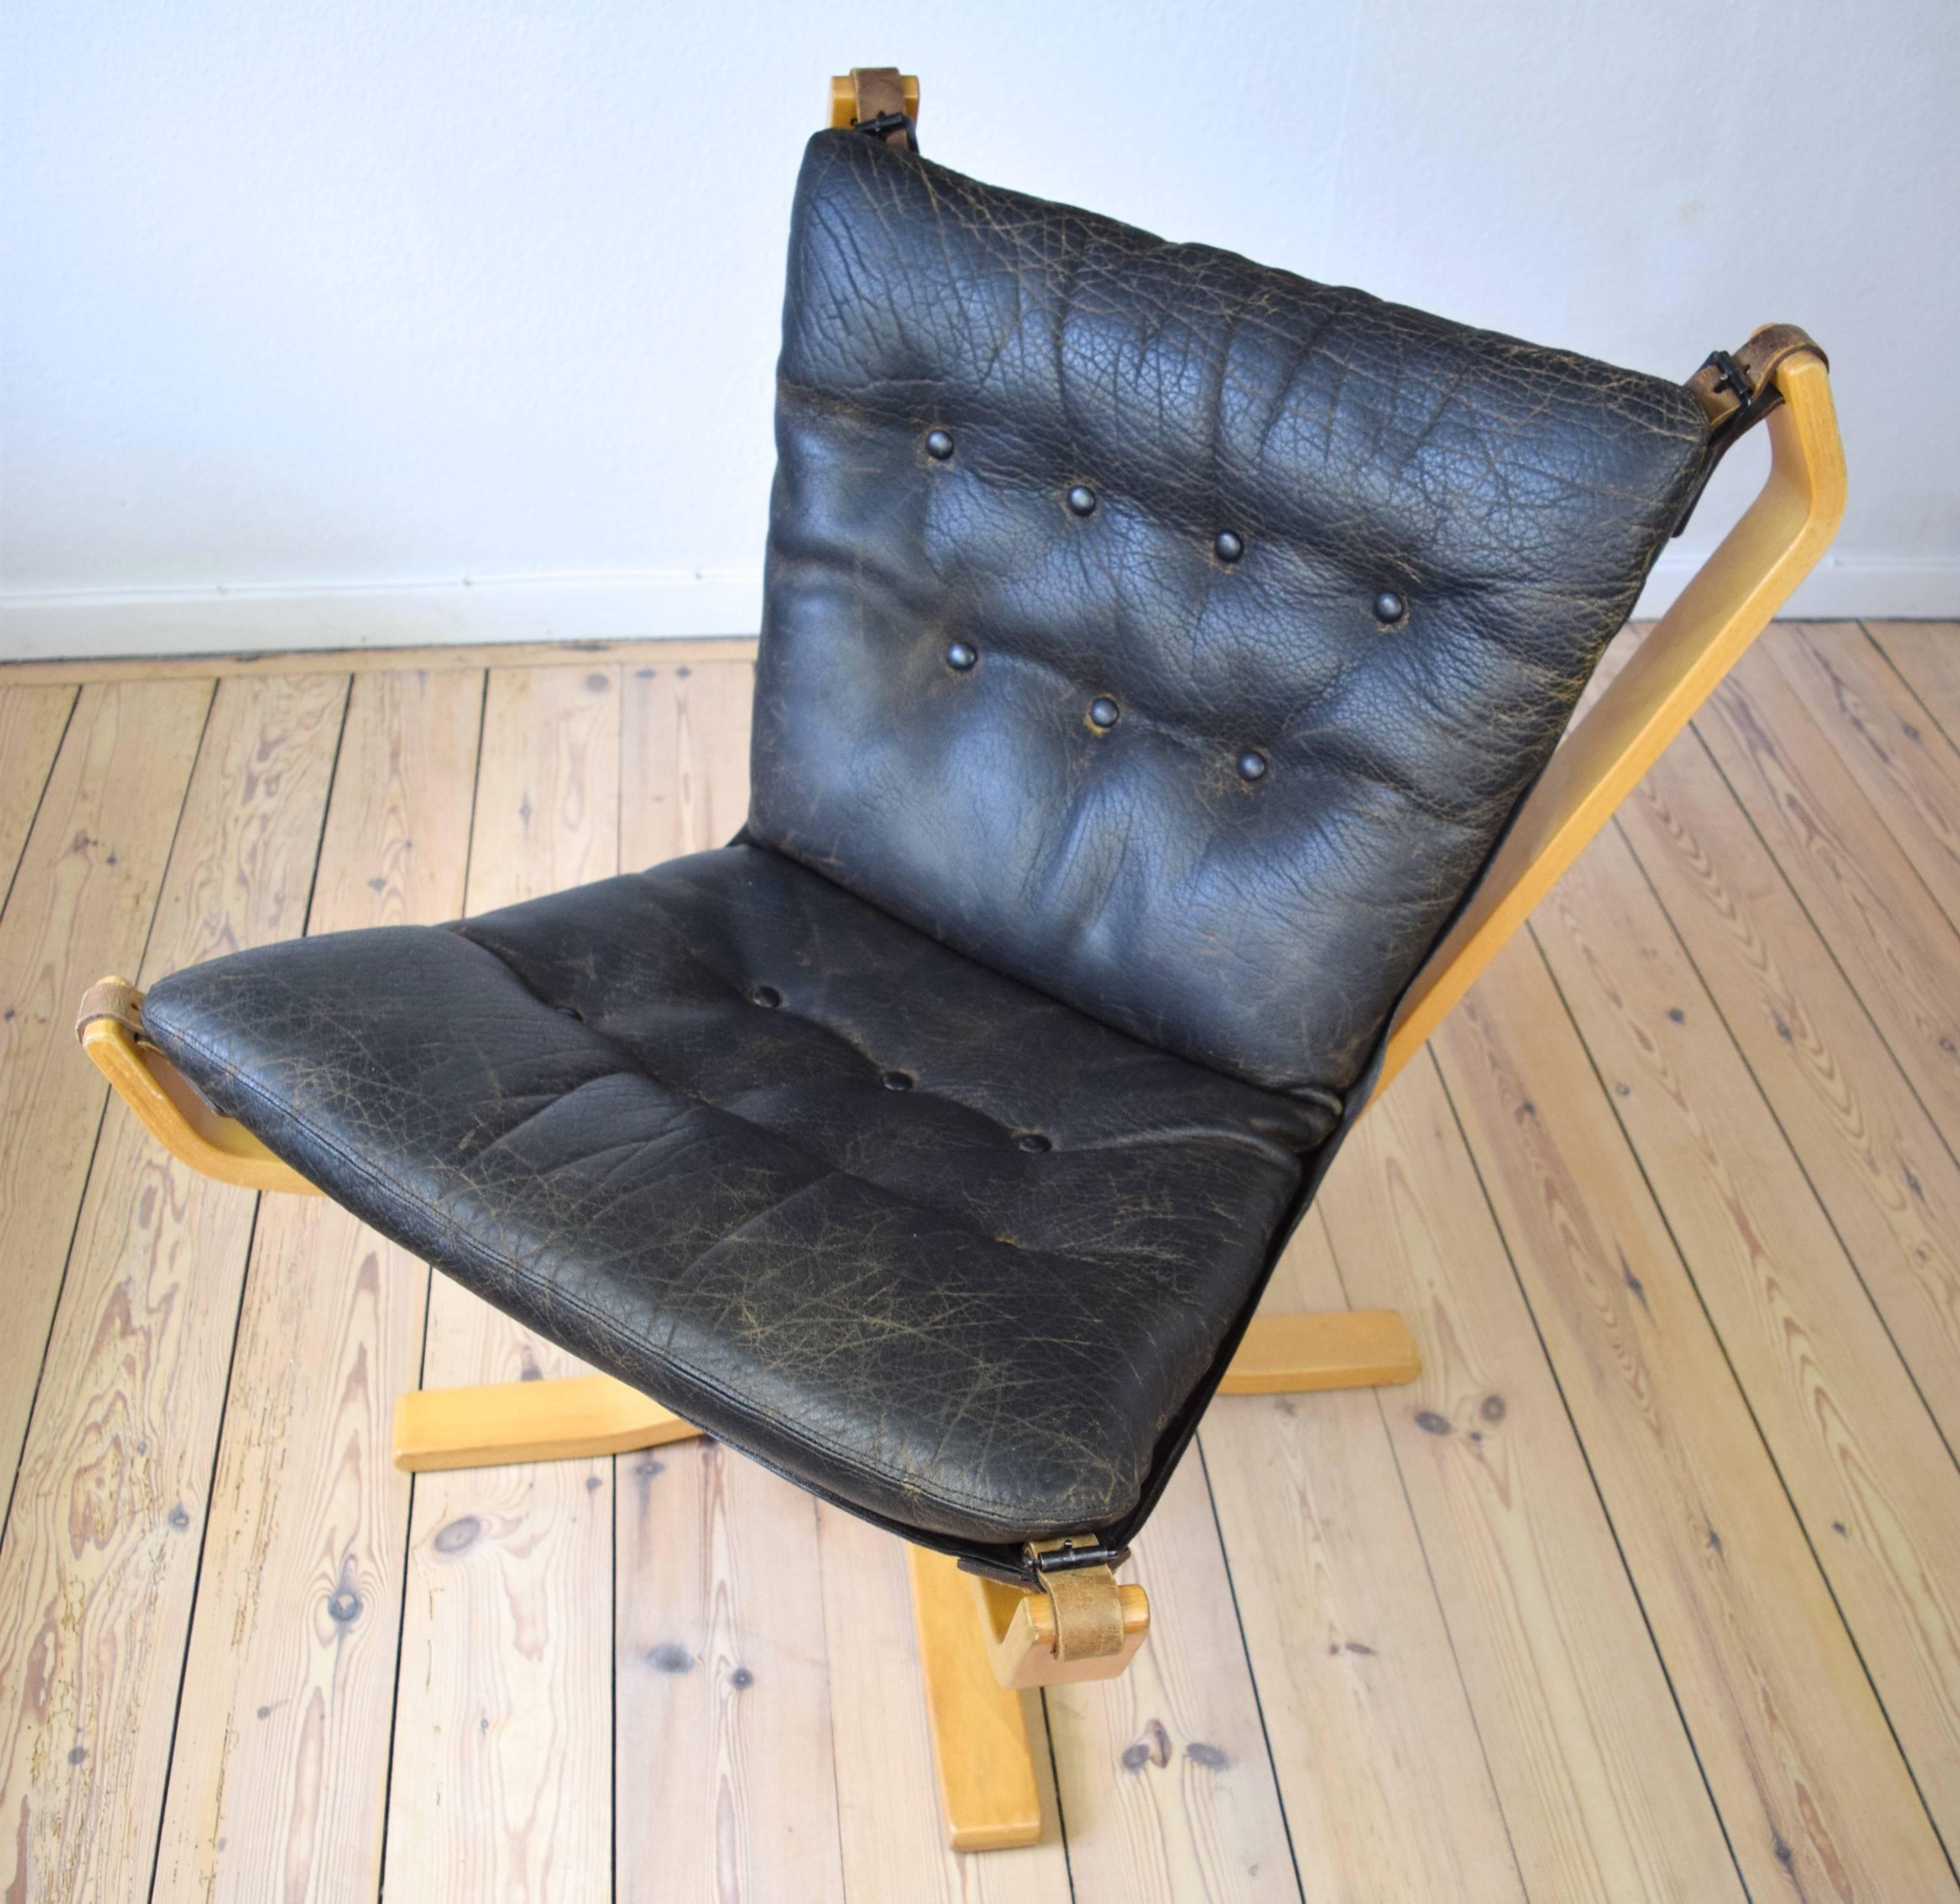 Low back Falcon chair designed by Sigurd Ressell and manufactured in Denmark in the 1970s. The chair features a bent beechwood frame, with a buffalo leather cushion. Buffalo hides are thick and durable as they are not stretched during the tanning